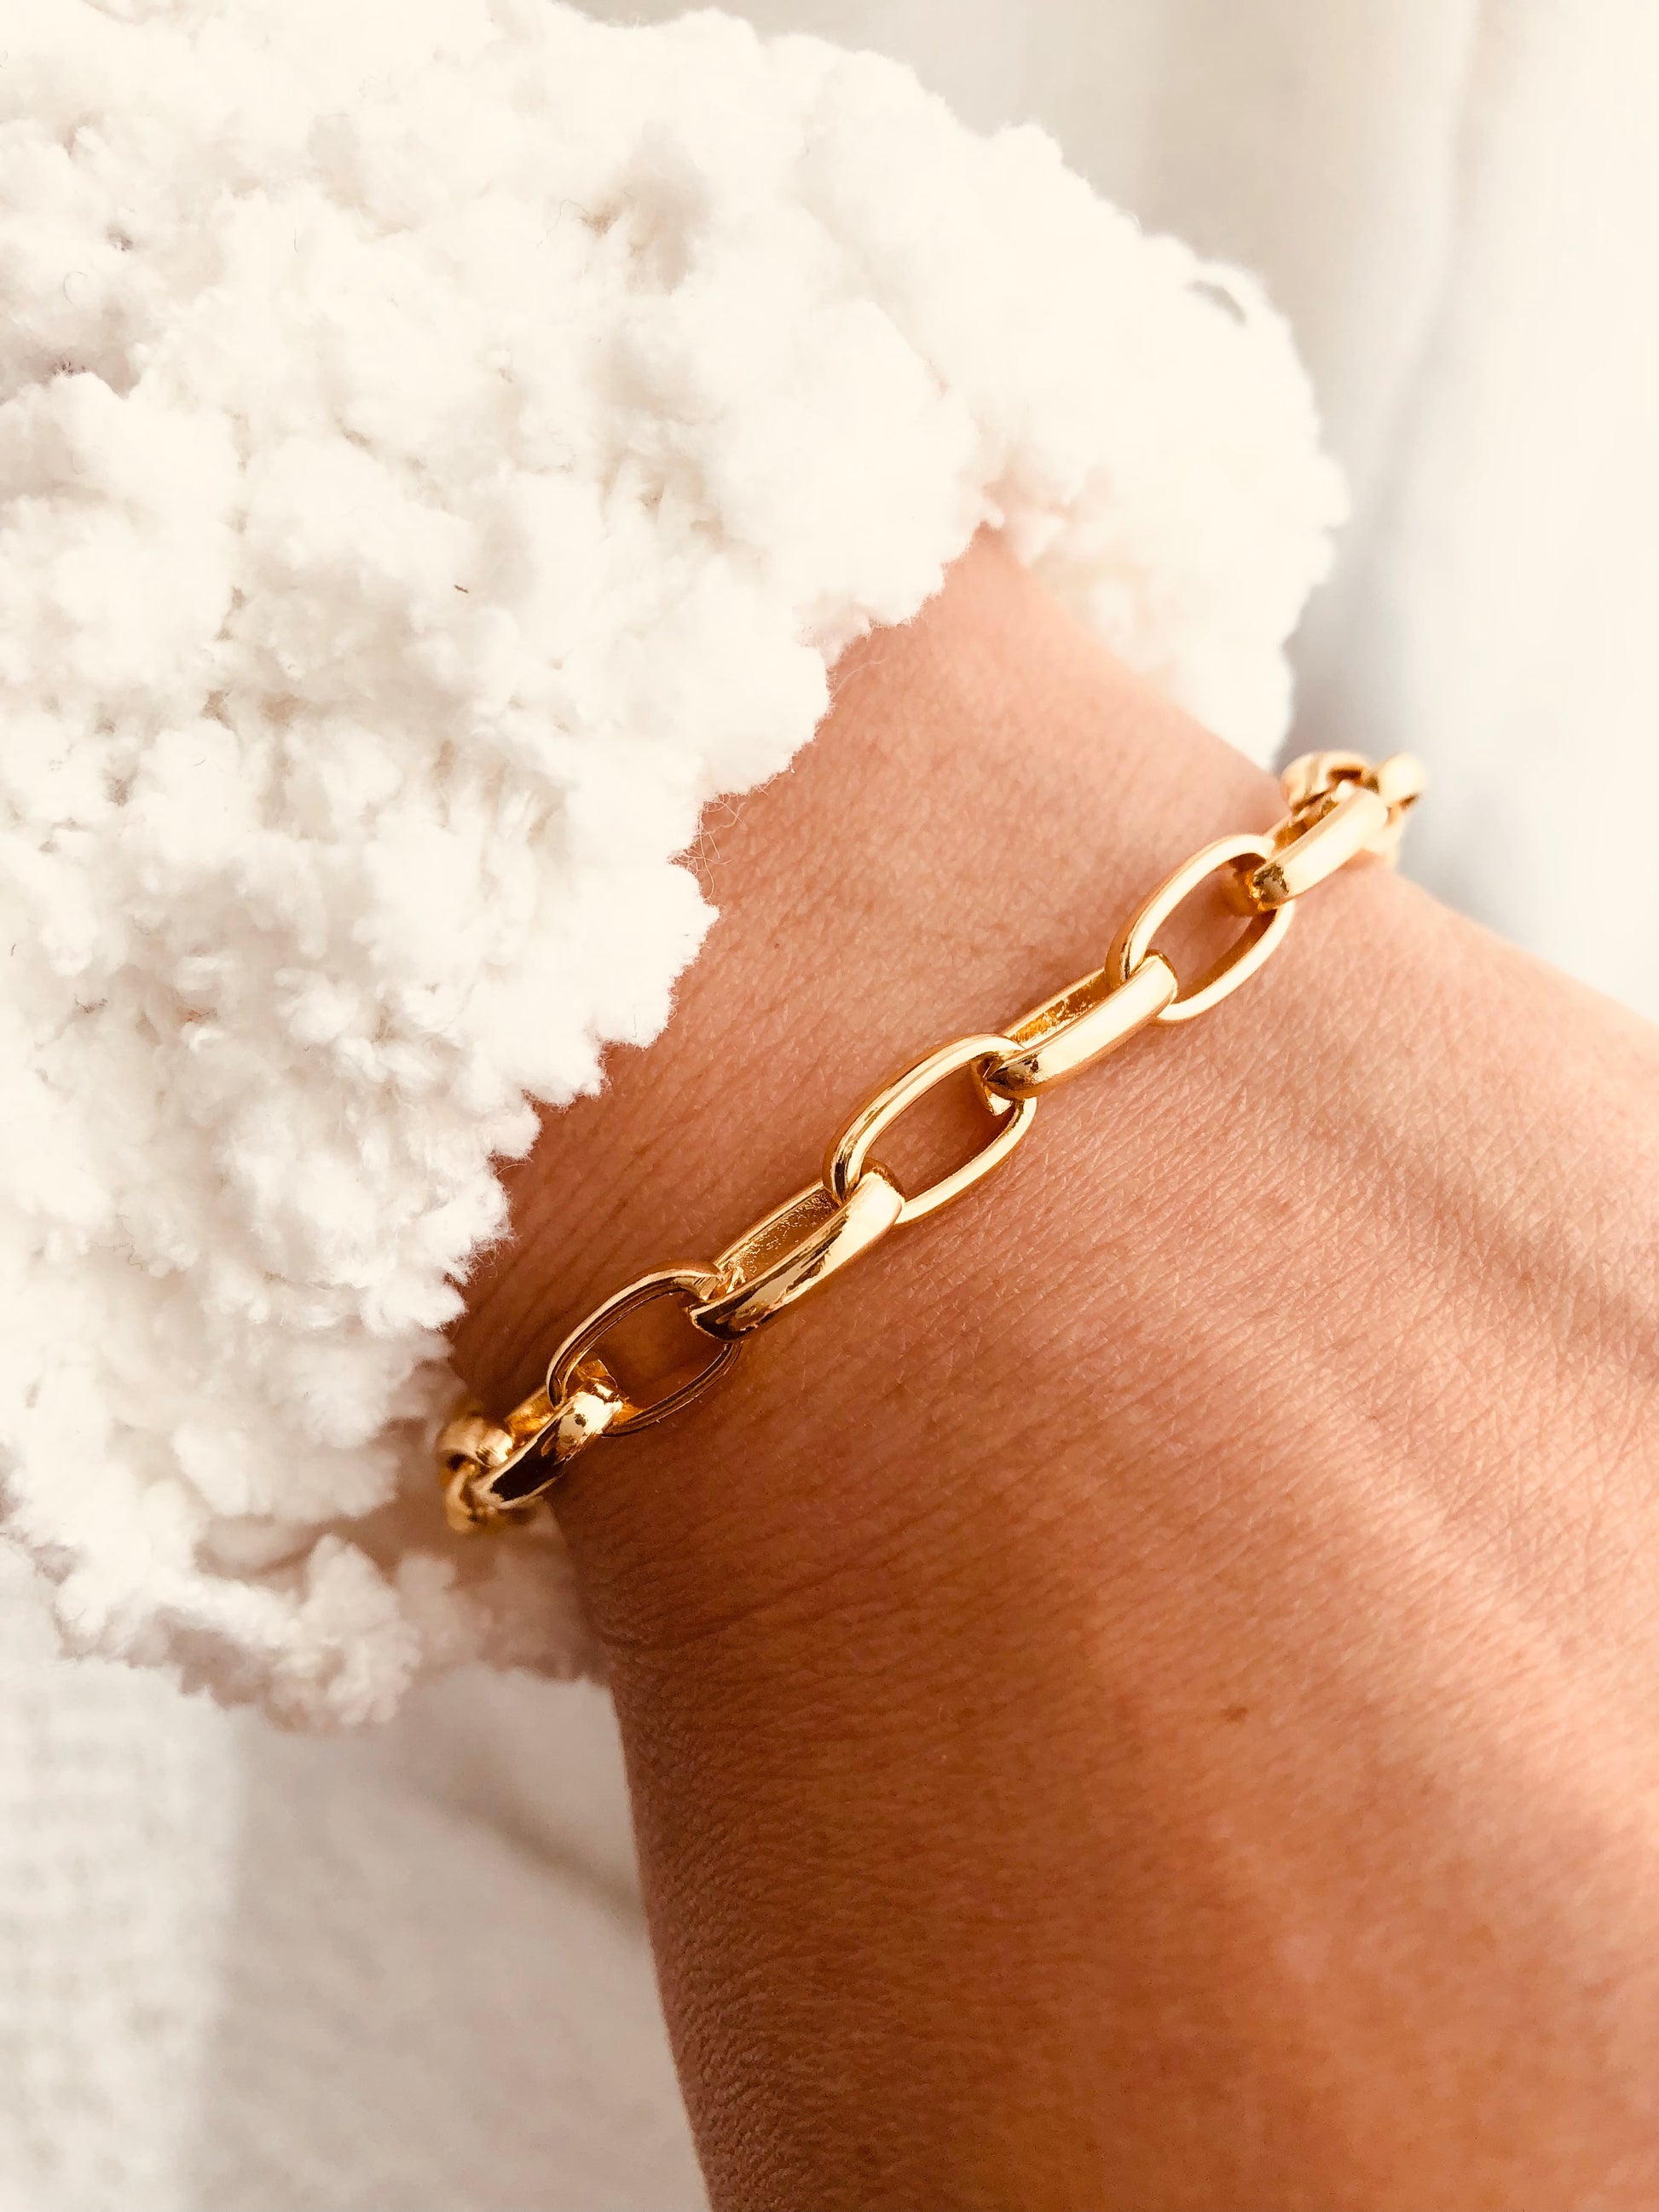 Oval Chain Bracelet, Chunky Link Bracelet, Gold Thick Bracelet, Thick Link Bracelet, Statement Bracelet, Mother’s Day Gifts, Minimalist Chain and Link